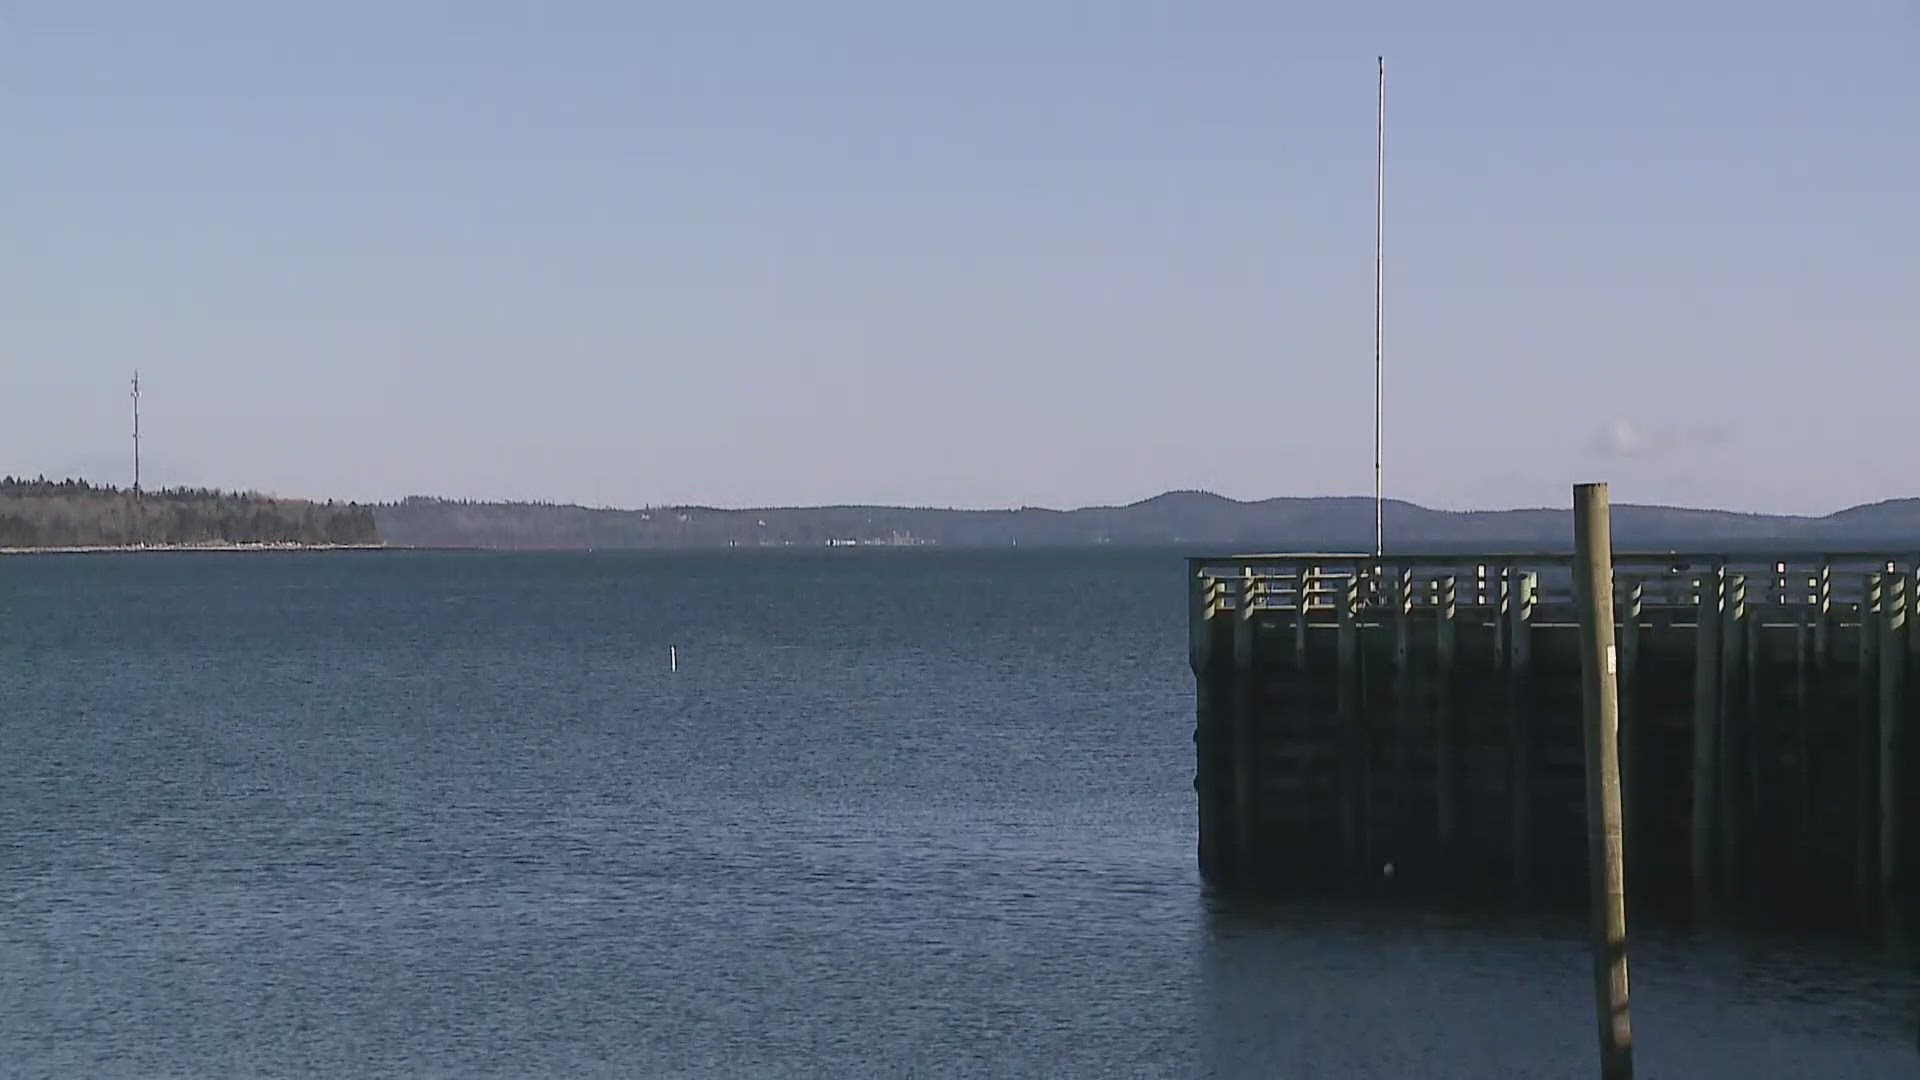 If passed, the bill would allow the Department of Environmental Protection to grant a permit to create an offshore wind terminal off the coast of Sears Island.